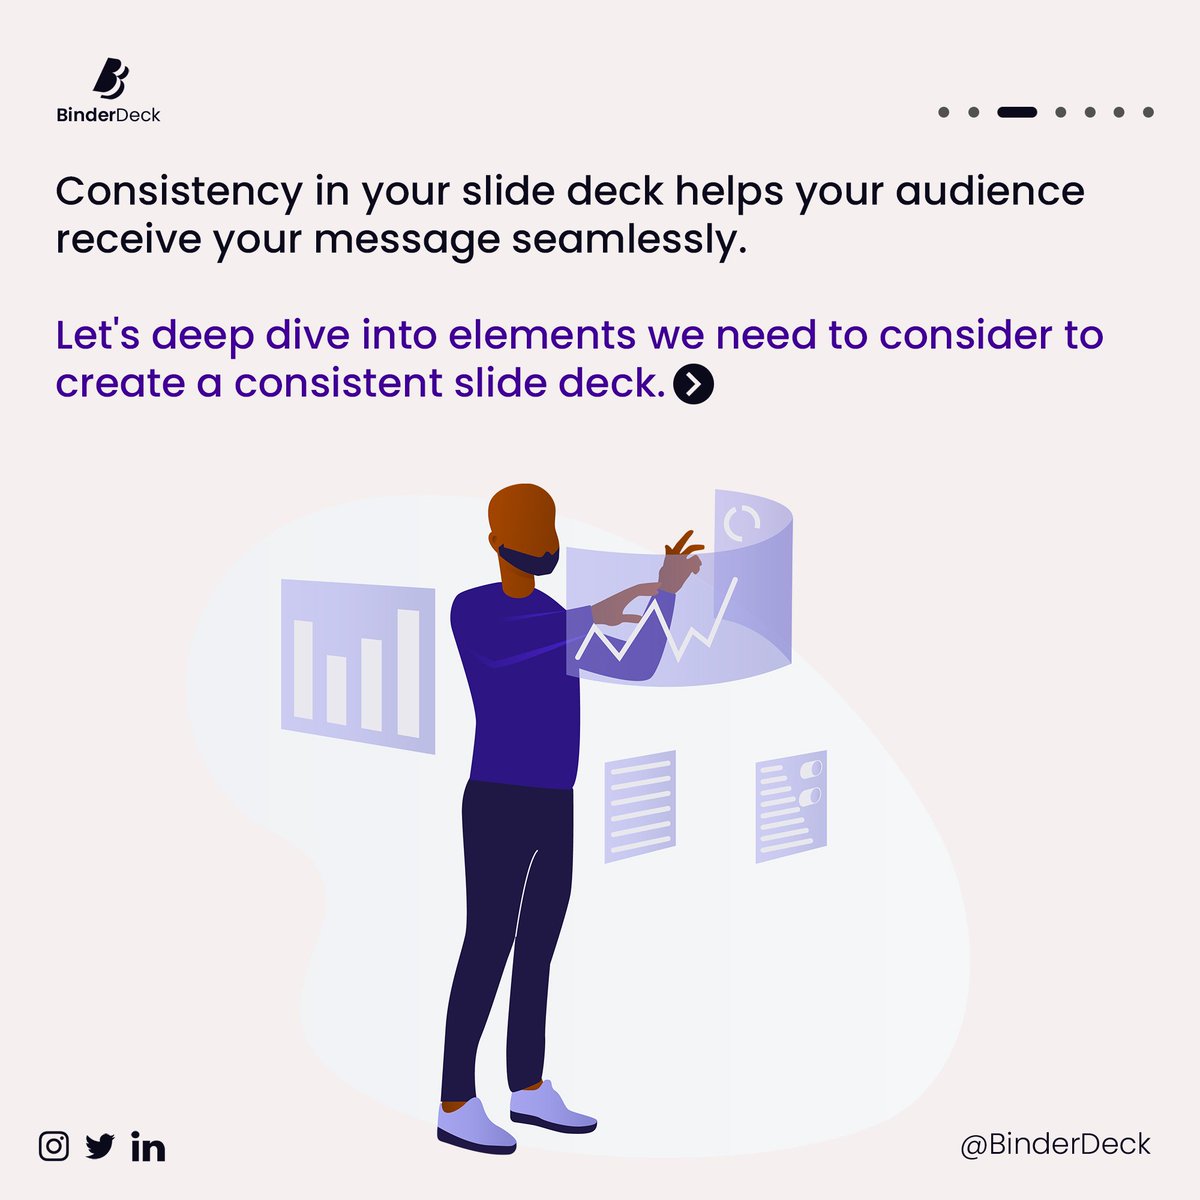 As a Slide deck creator, you should aim for consistency of certain elements because your deck, as a whole, should have a feel of unity and cohesiveness.  #Presentations  #PresentationDesign  #slideshow  #slidedeck  #ContentCreator  #contentdesign  #business